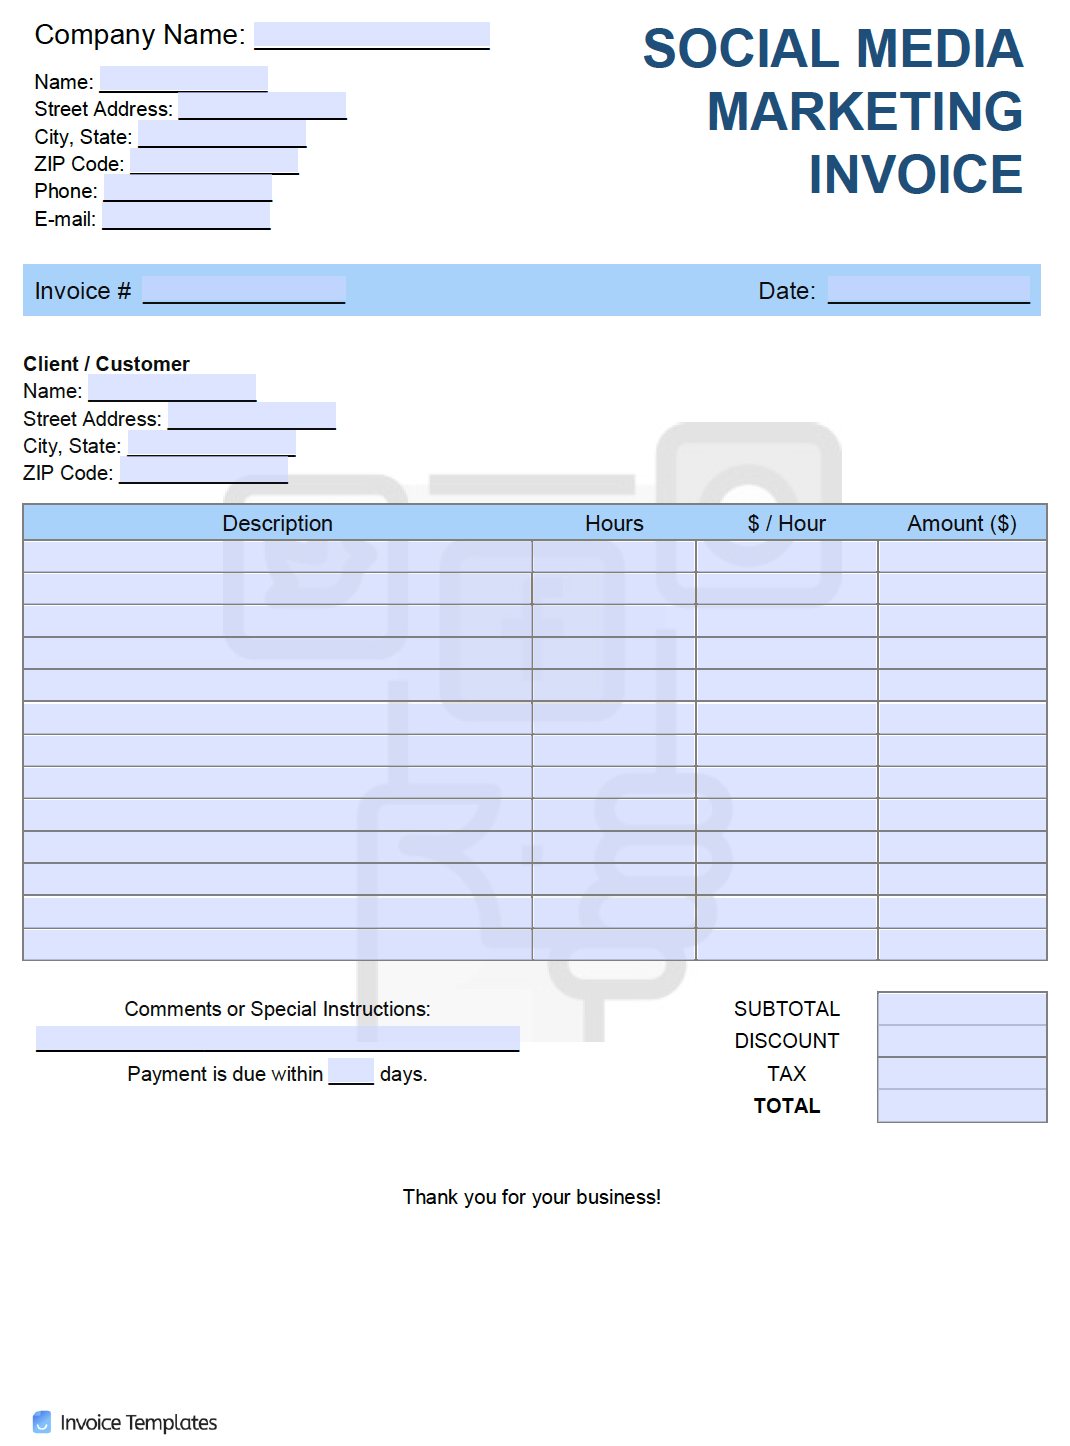 Free Social Media Marketing Invoice Template  PDF  WORD  EXCEL Pertaining To Media Invoice Template